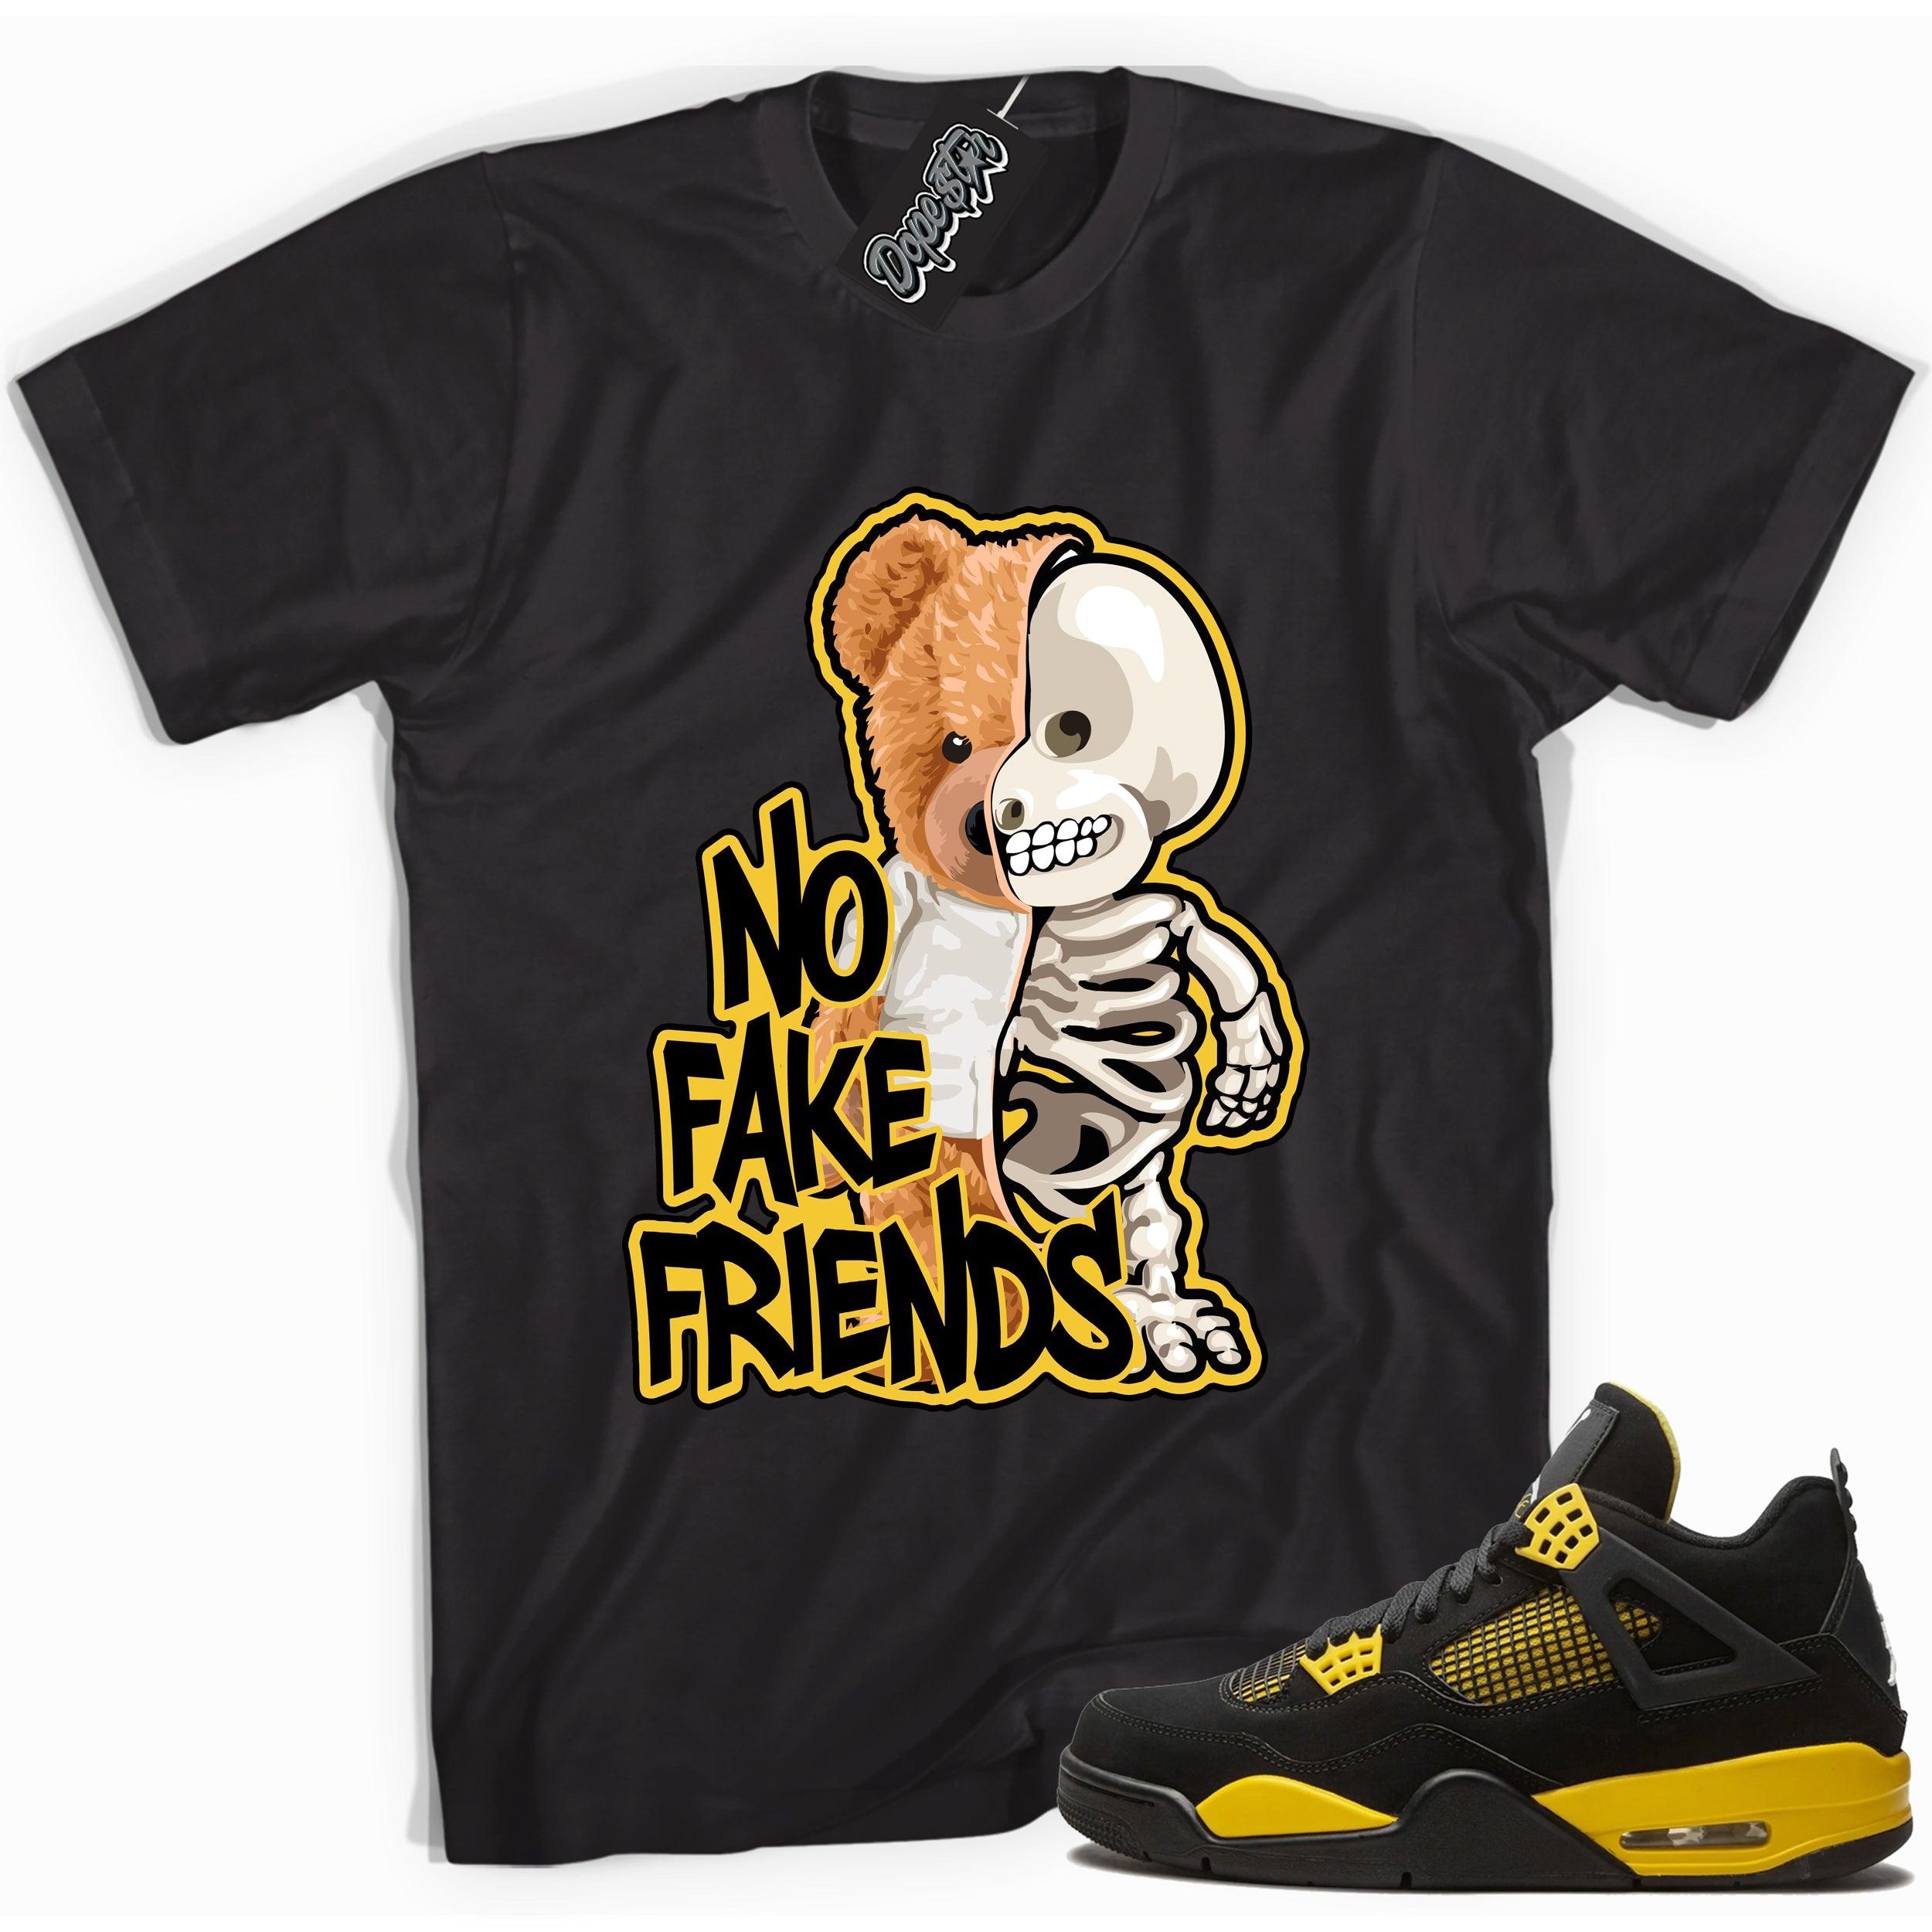 Cool black graphic tee with 'no fake friends' print, that perfectly matches  Air Jordan 4 Thunder sneakers